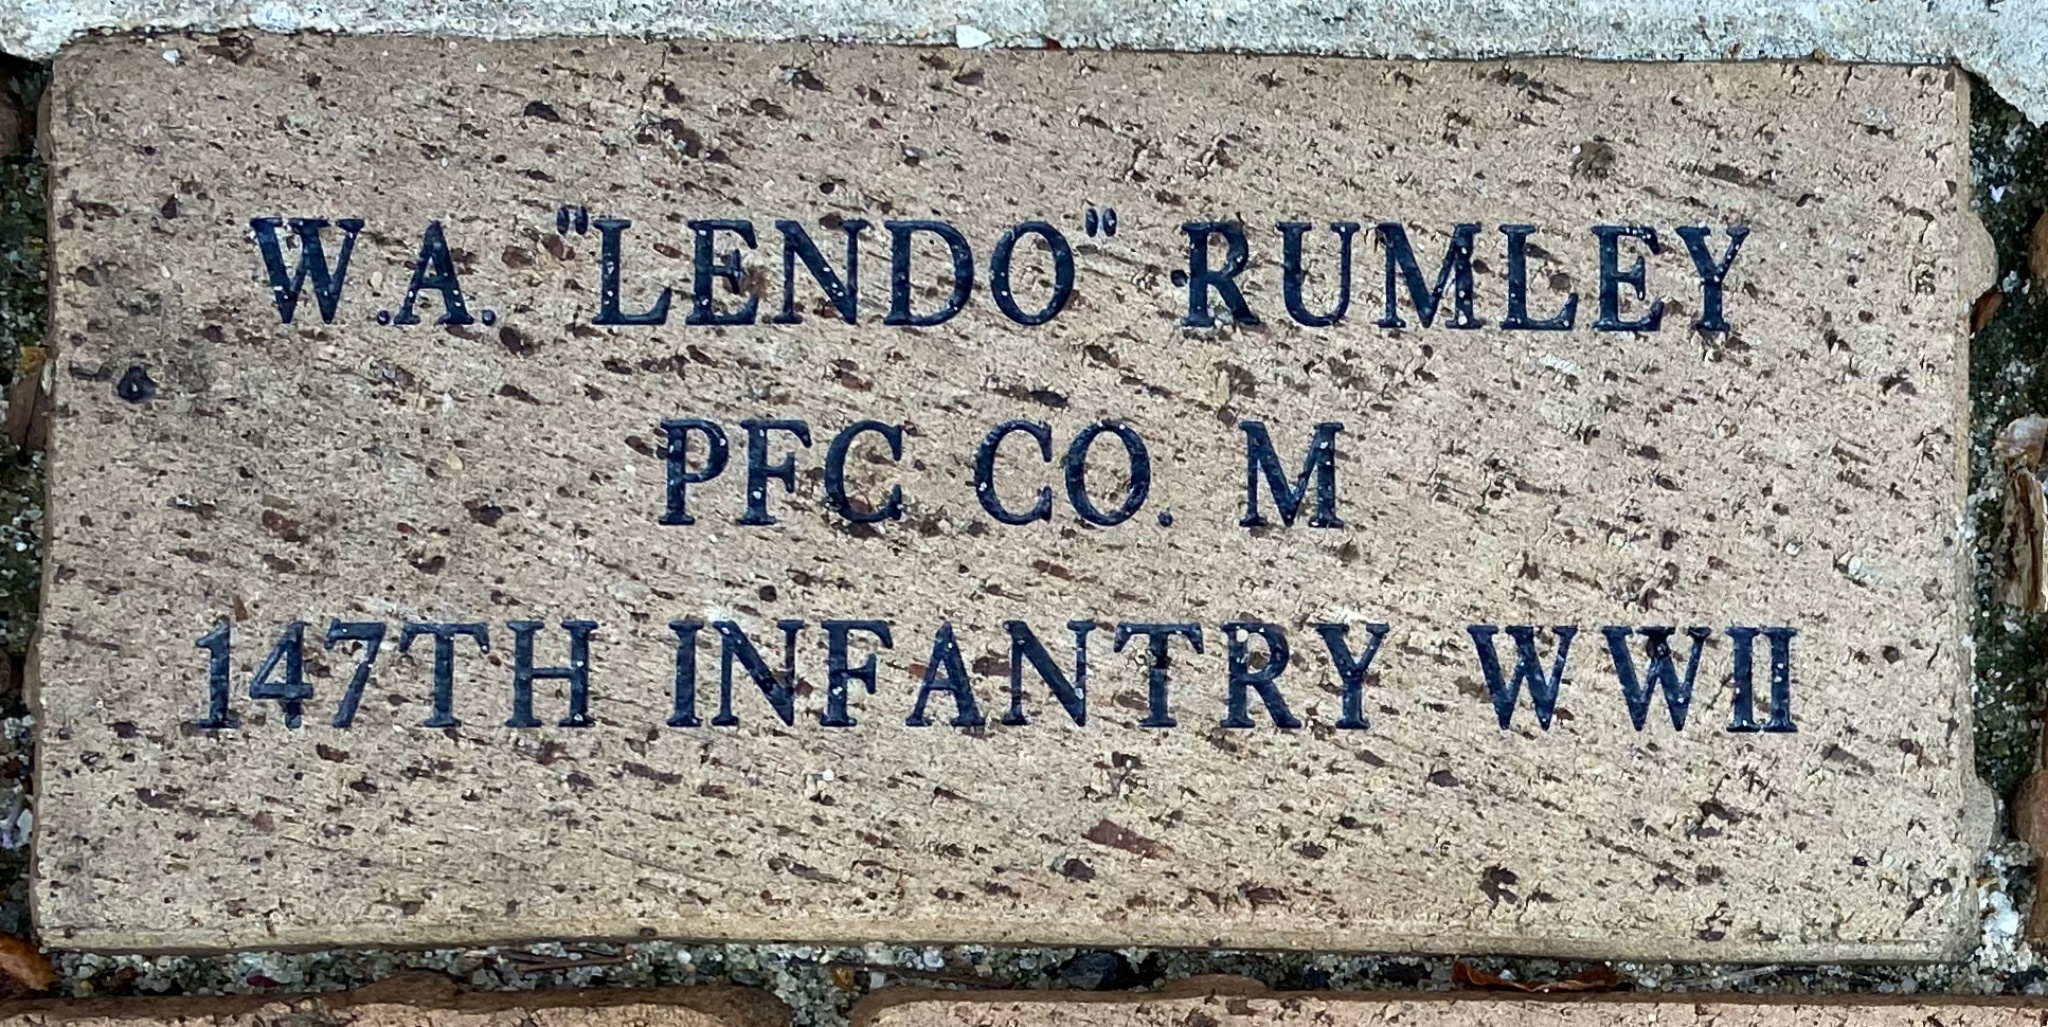 W.A. “LENDO” RUMLEY PFC CO. M 147TH INFANTRY WWII